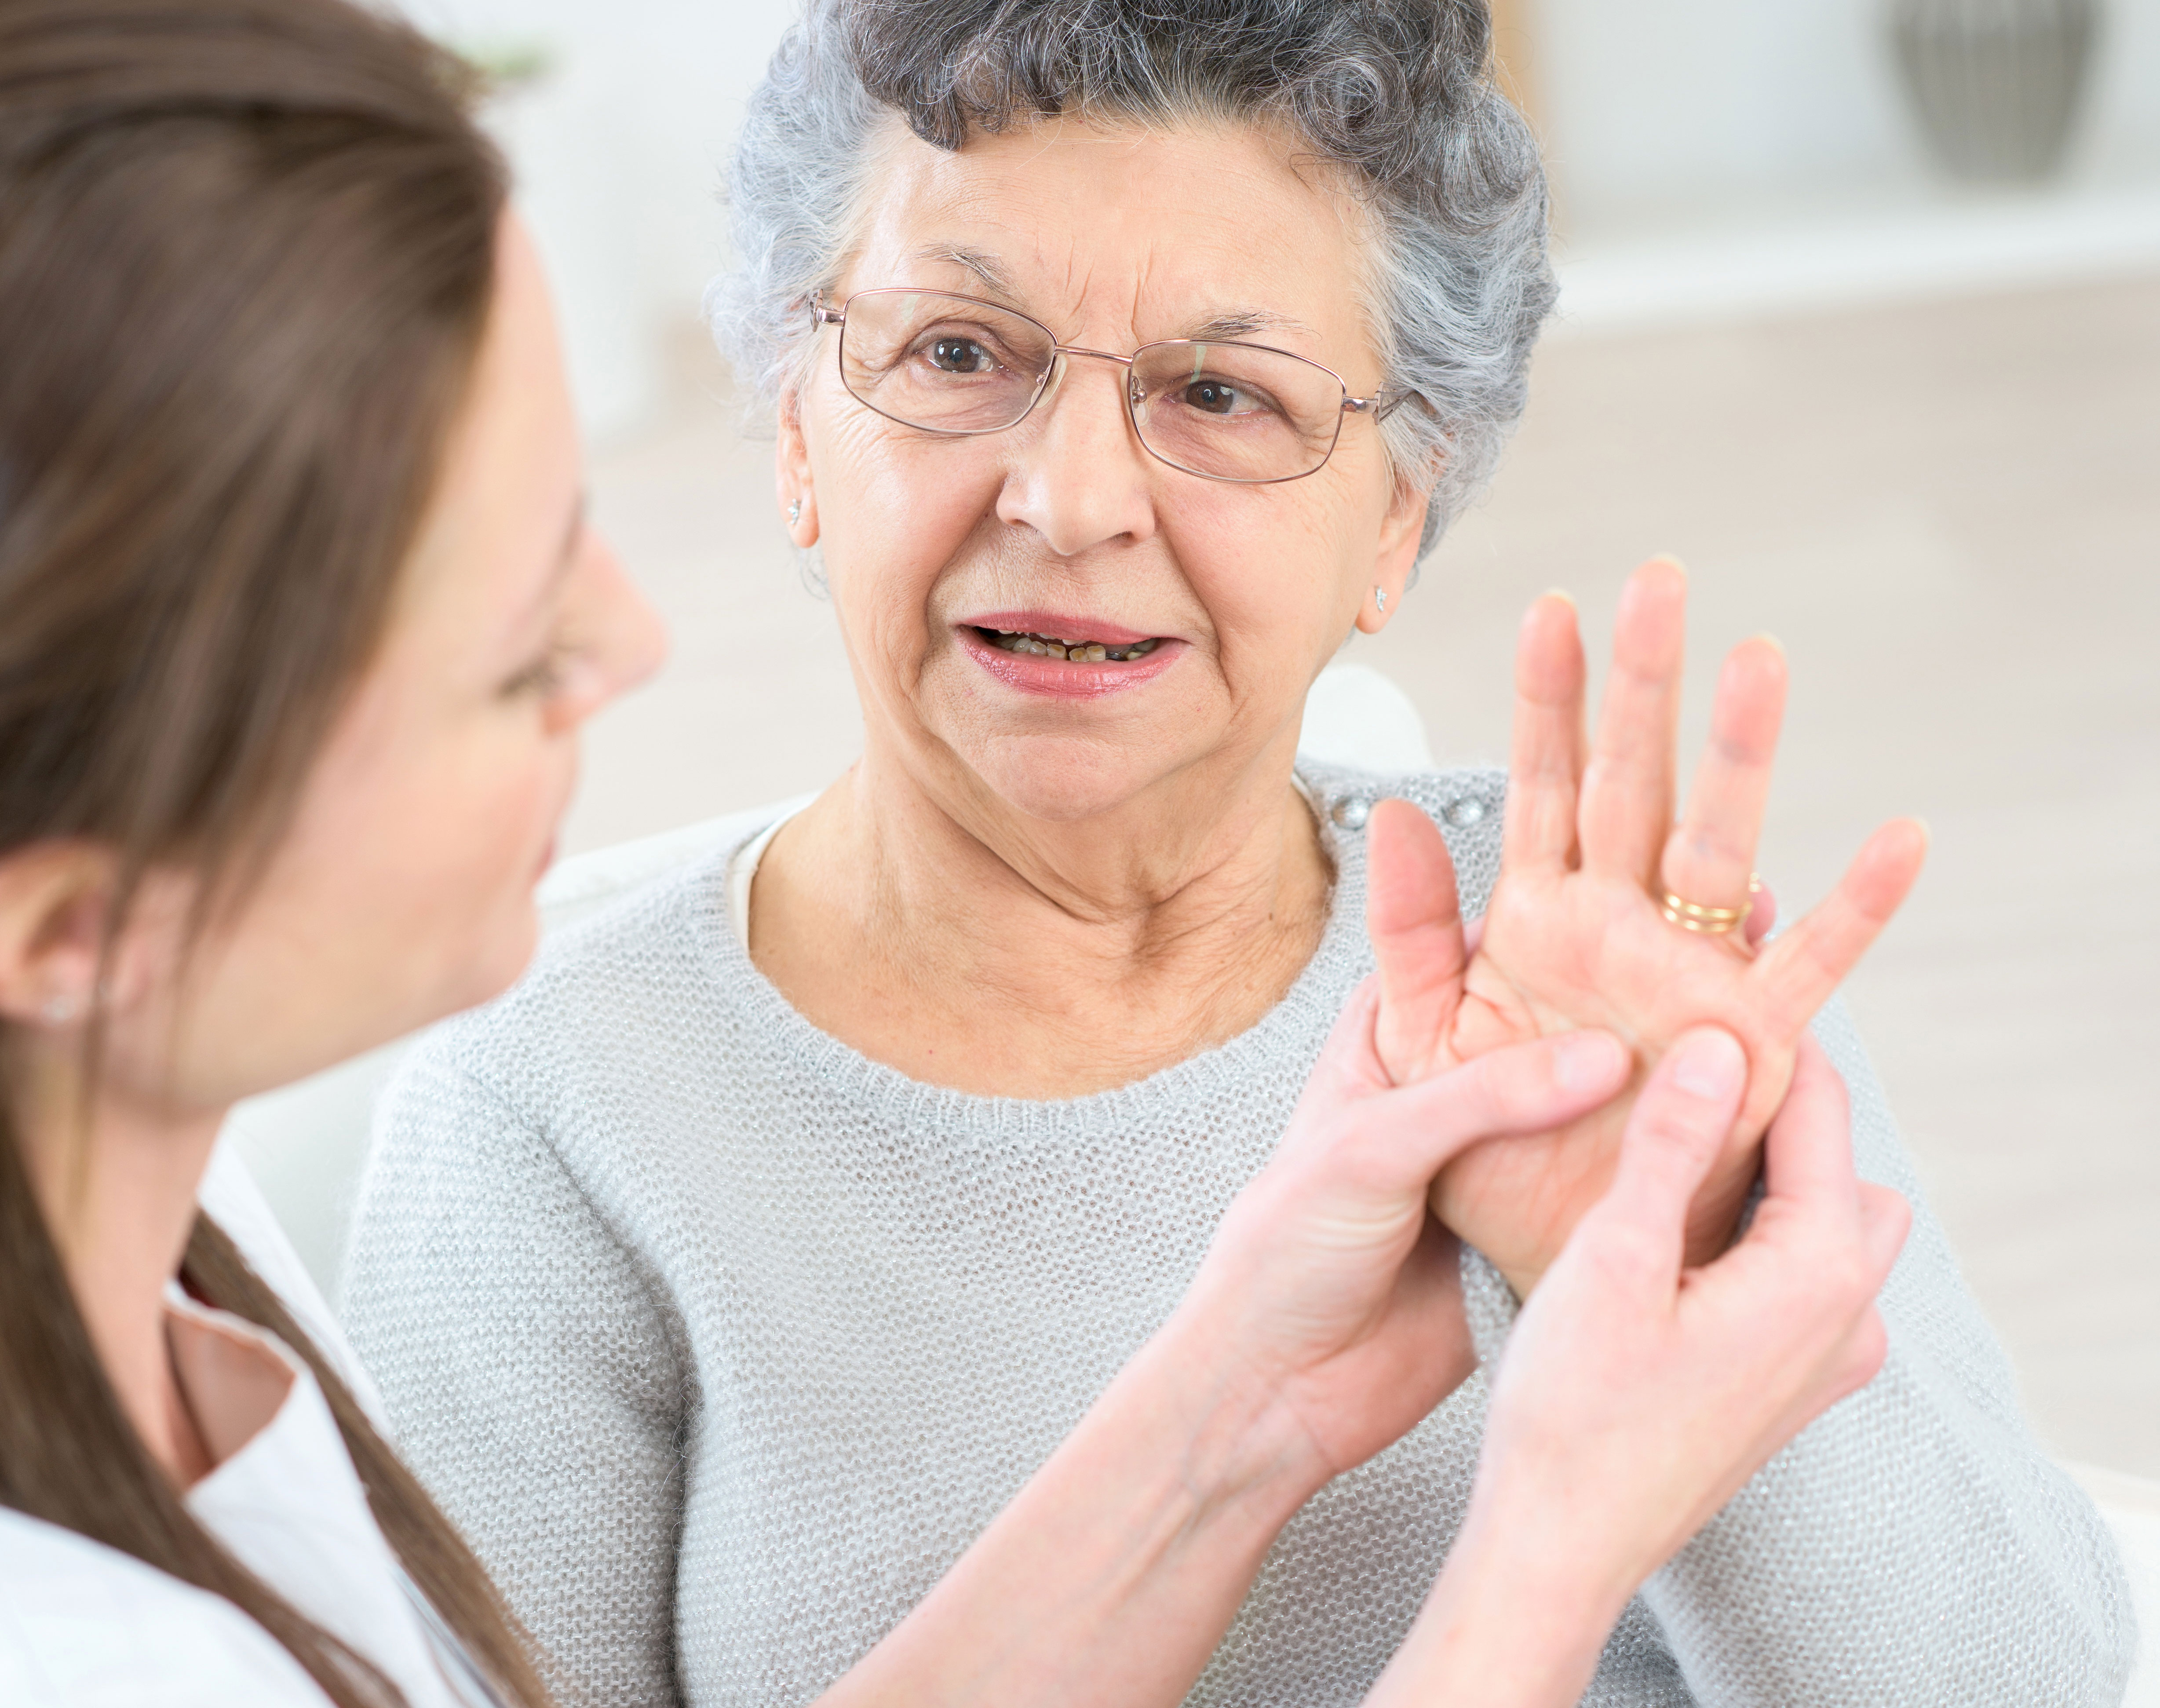 Physical therapist helping elderly woman with hand pain